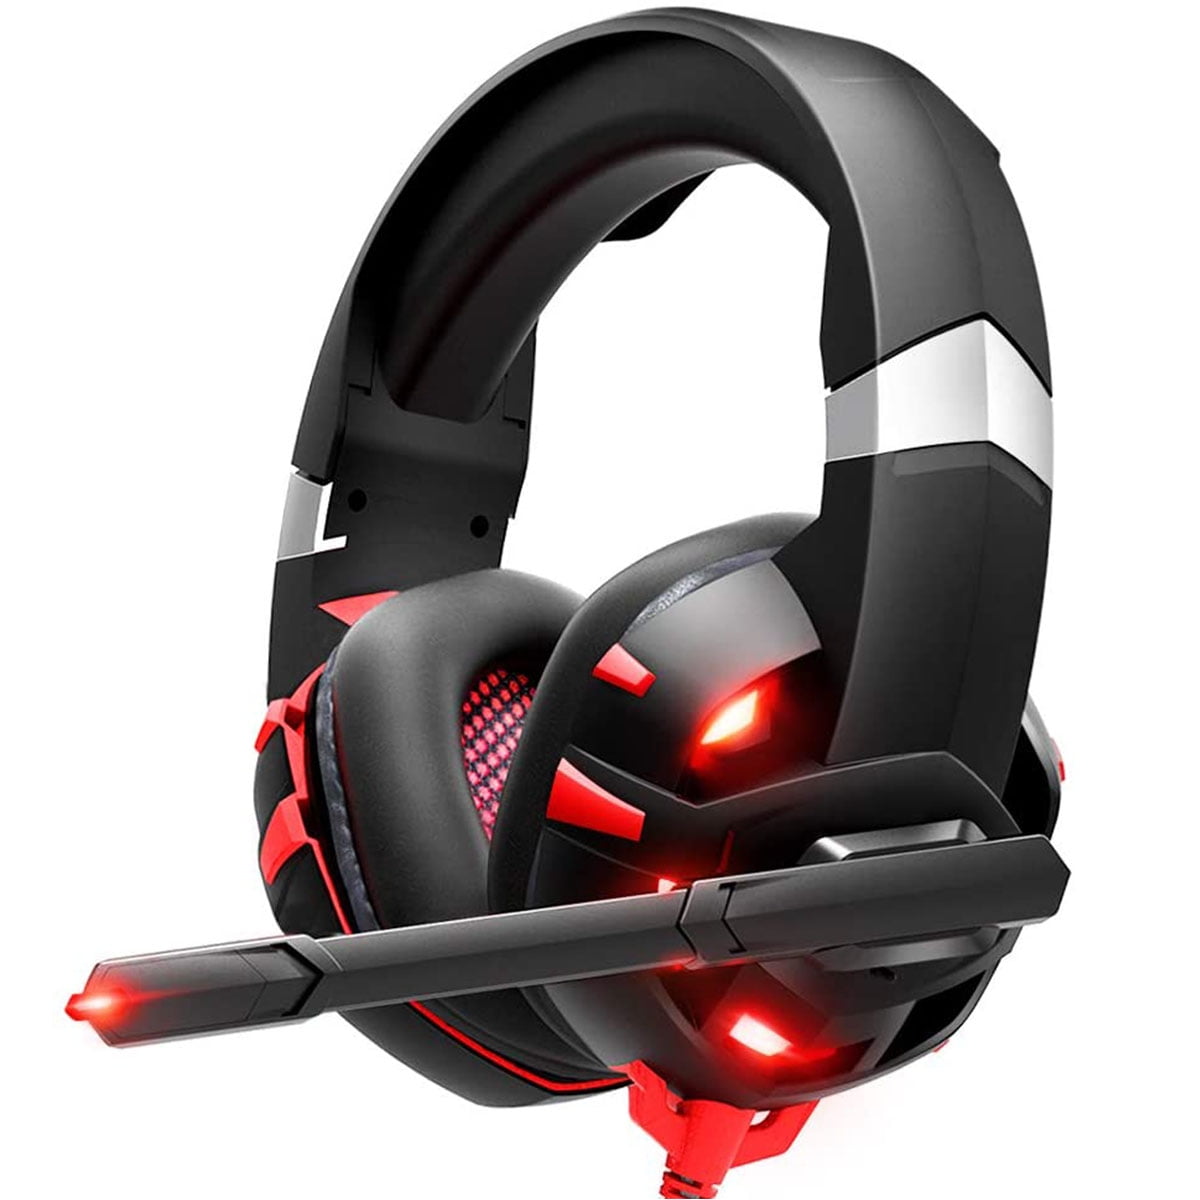 ufravigelige Afslut bruge RUNMUS Gaming Headset with Noise Canceling Mic for PS4, Xbox One, PC,  Mobile, 7.1 Surround Sound Headphone with LED Light for Kids Adults -  Walmart.com